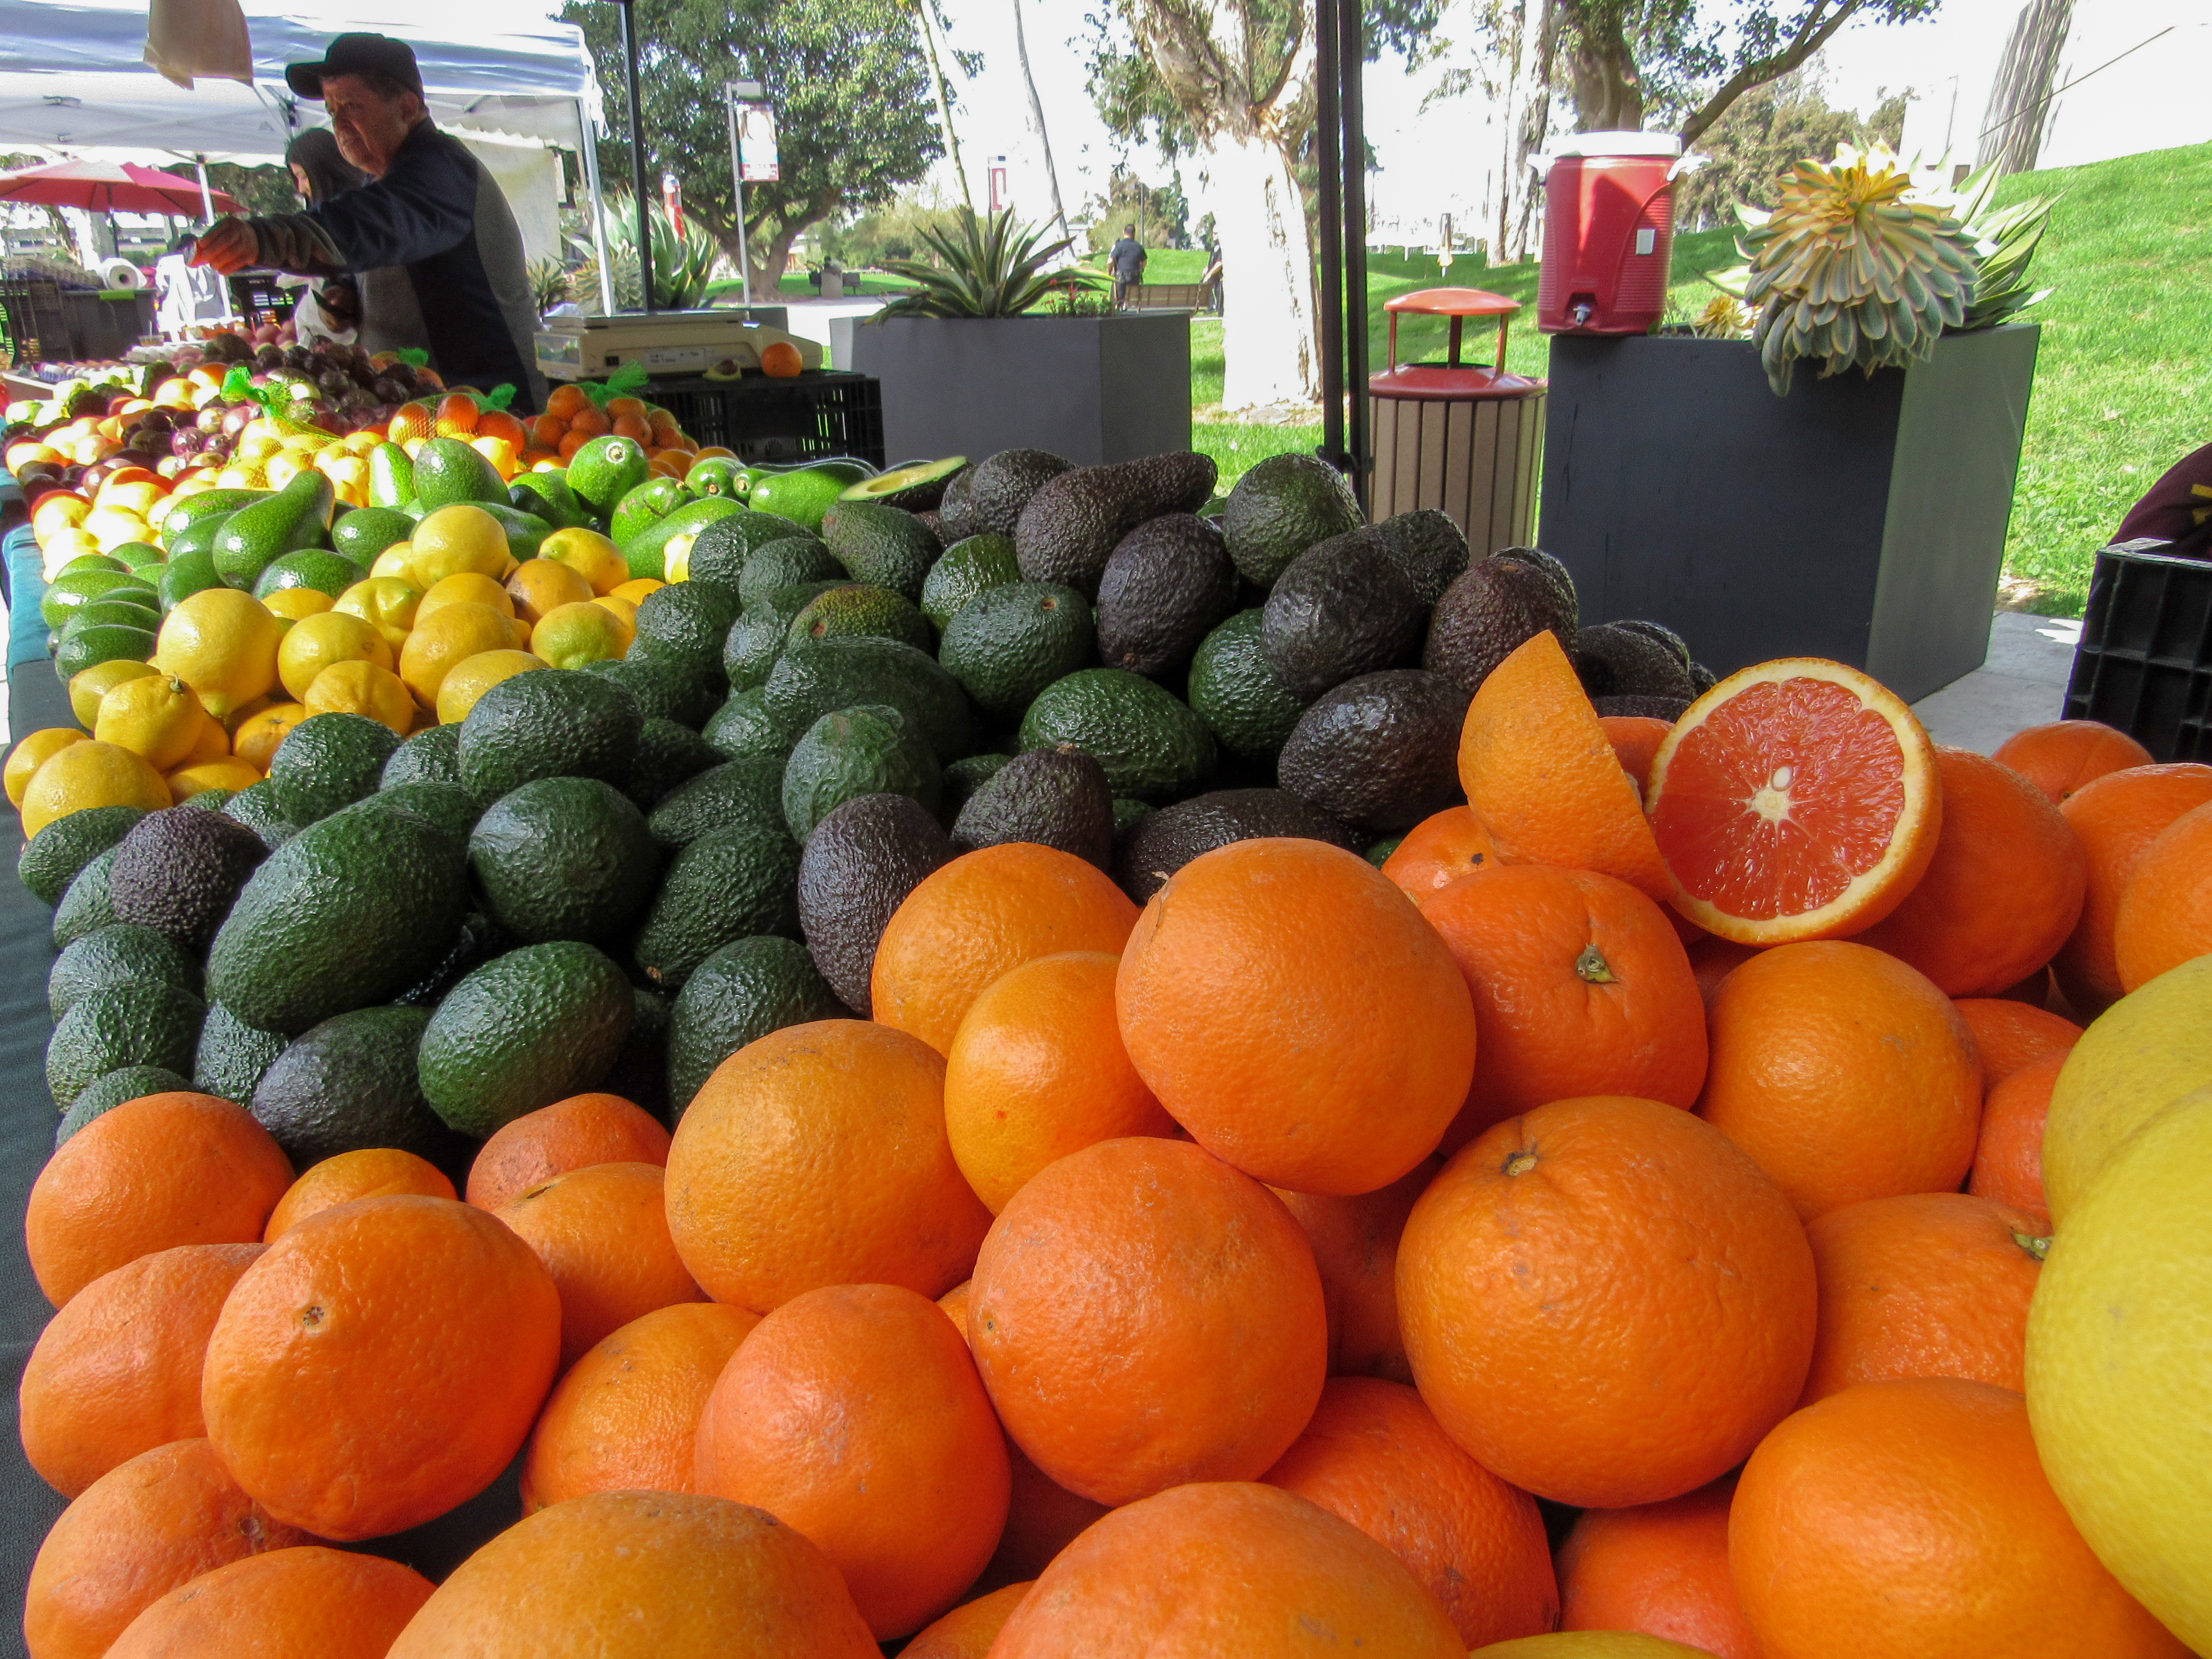 Farmers Market Makes Its Way To The CSUDH Campus